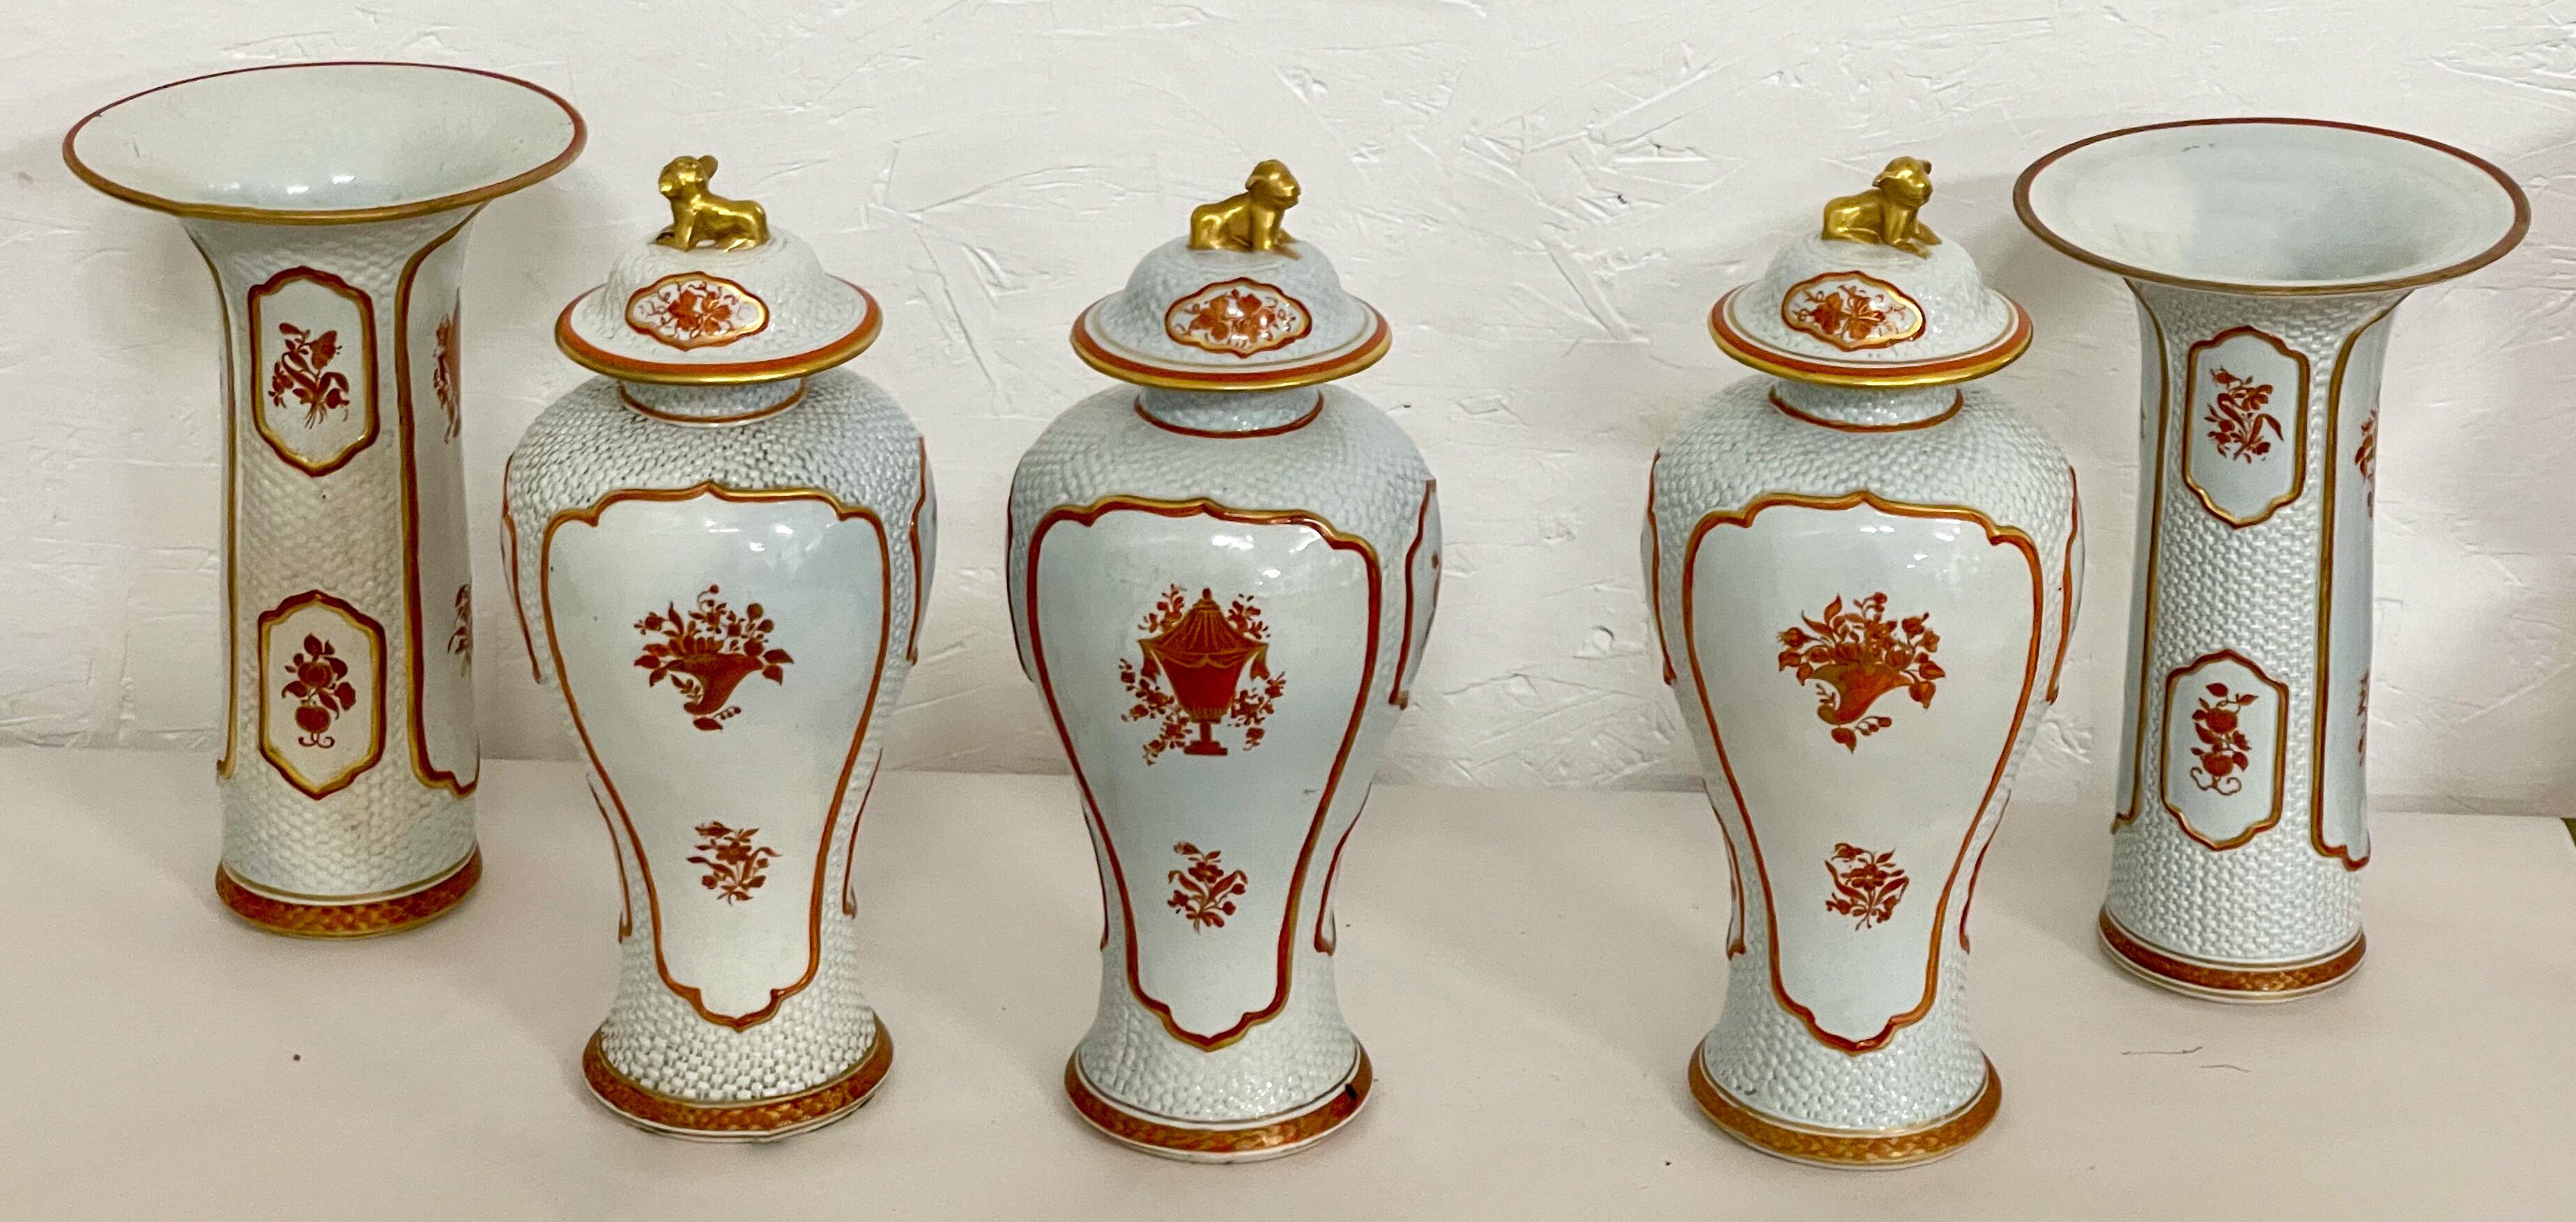 This is a lovely Asian inspired armorial garniture set with two vases and three ginger jars. They have vibrant coloration in coral and gilt. They set is marked.